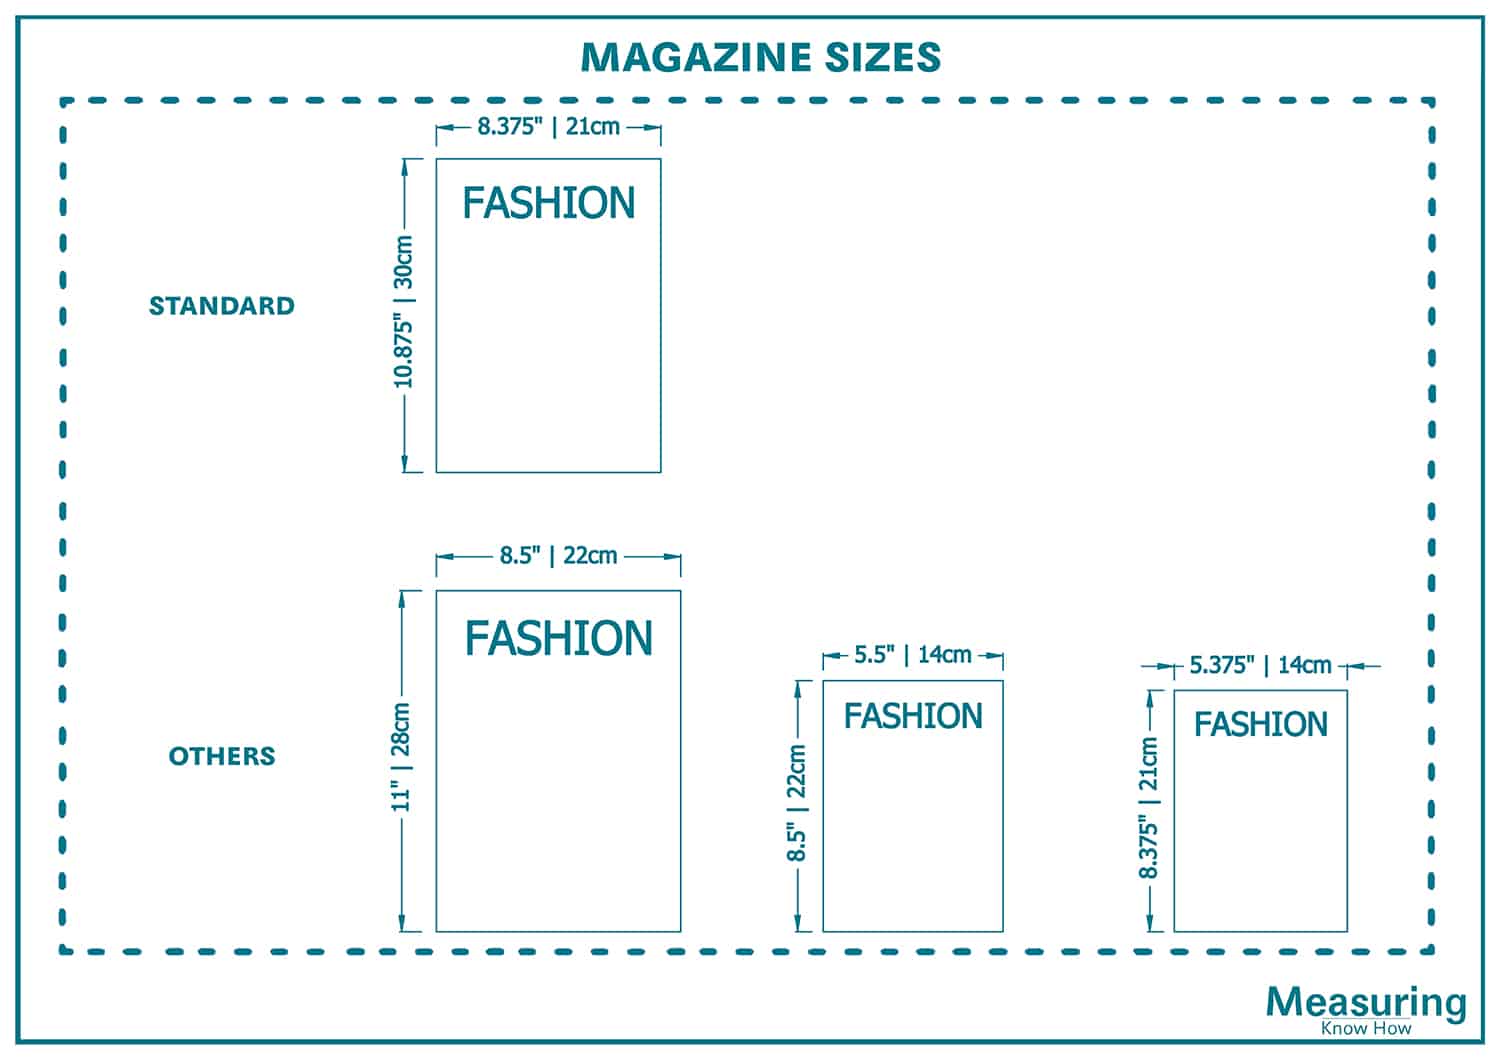 Standard Magazine Sizes And Guidelines with Drawing MeasuringKnowHow